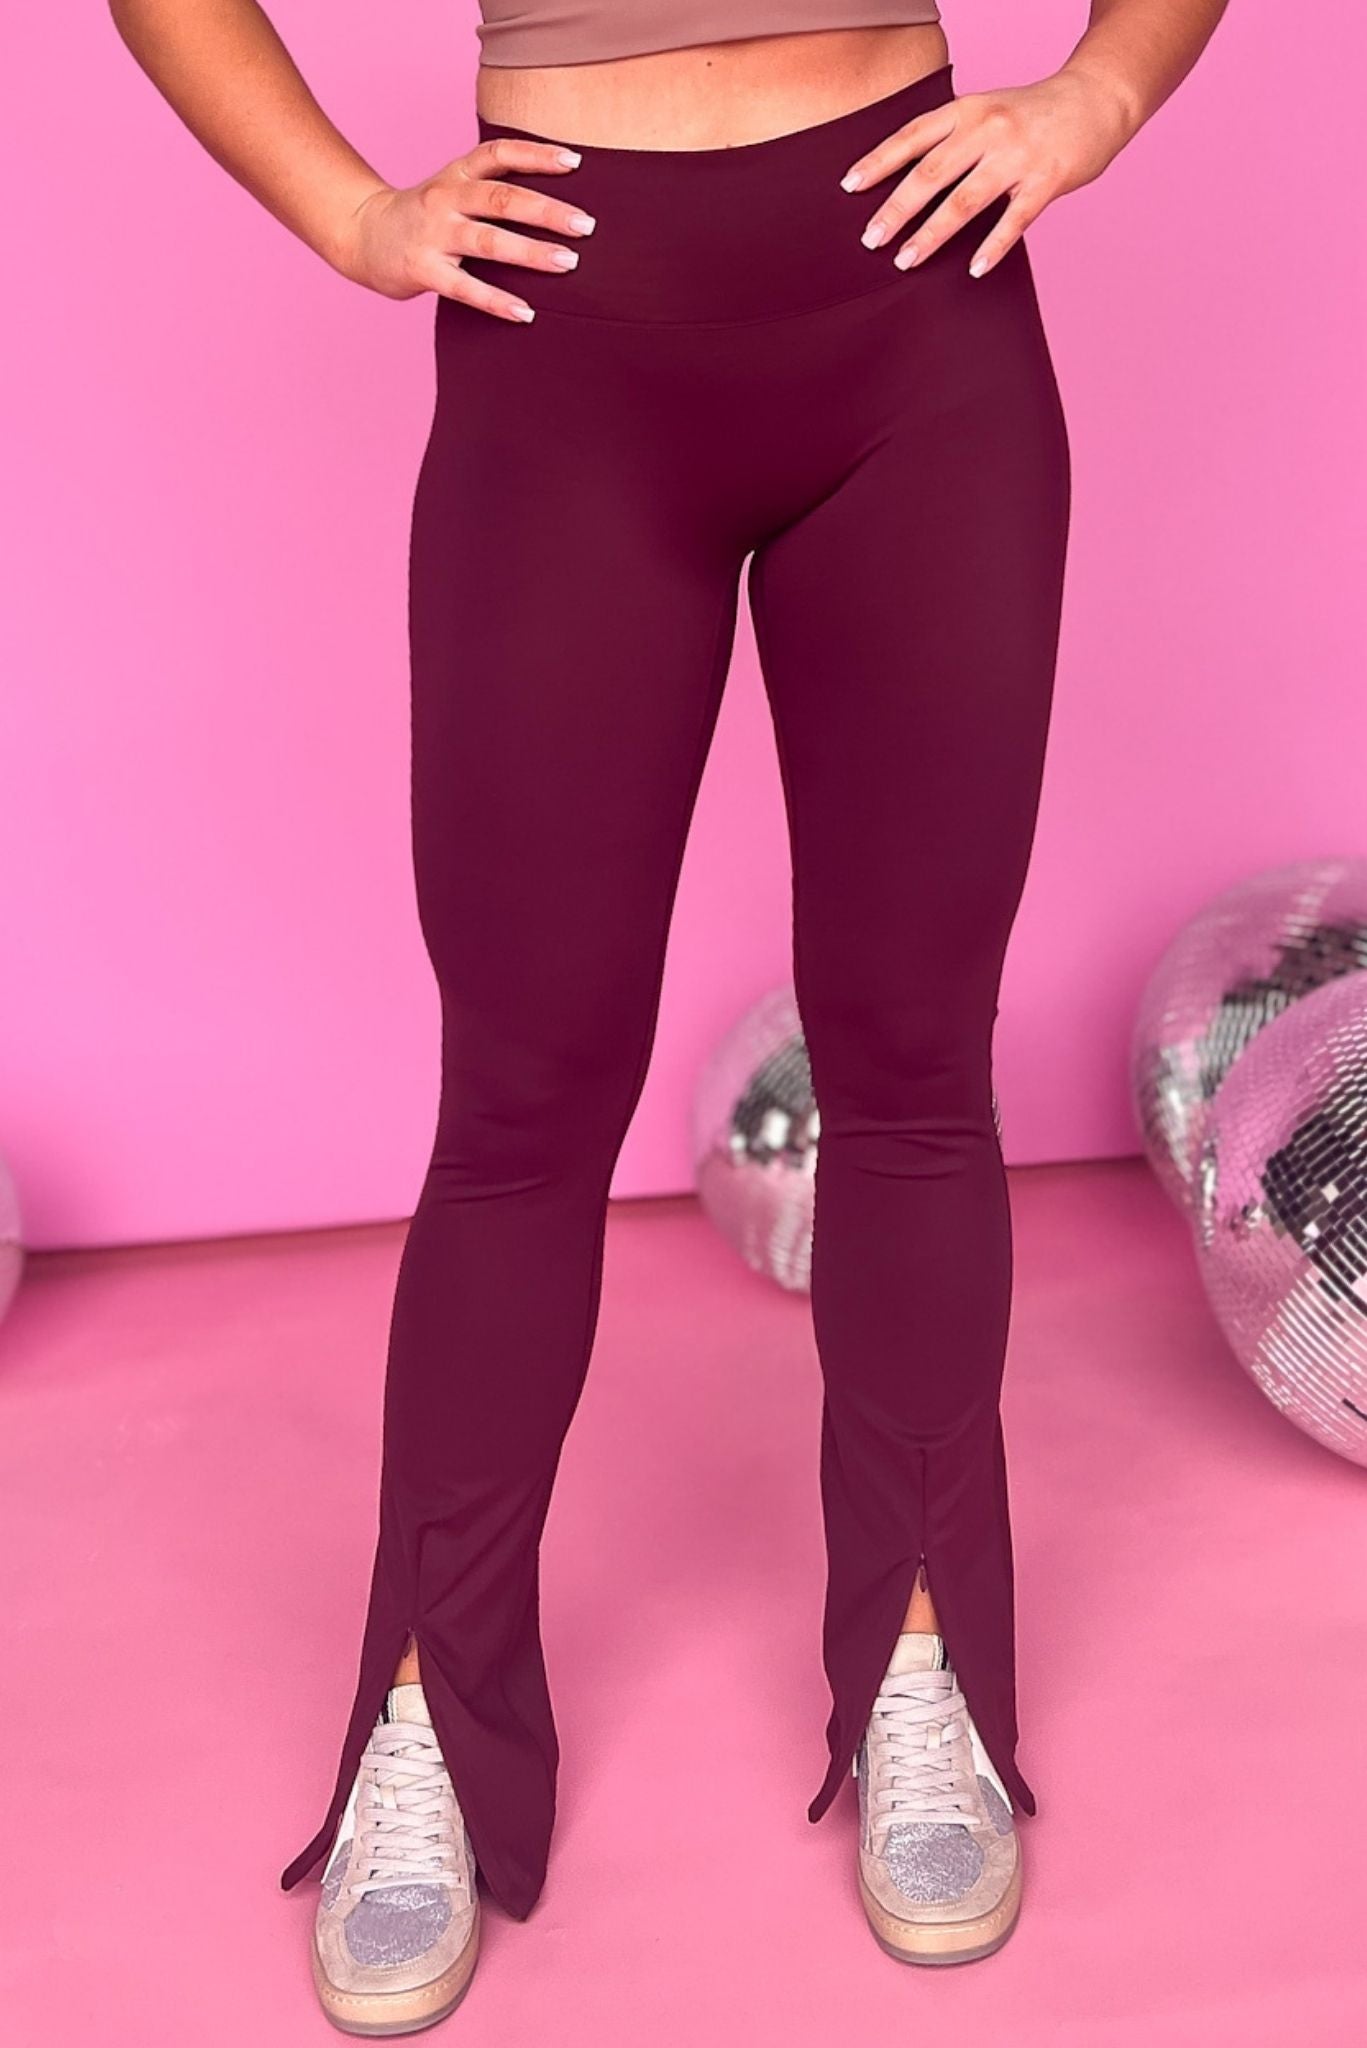 Victoria's Secret Pink Ultimate High Waist Ruched Leggings, Leggings, Clothing & Accessories